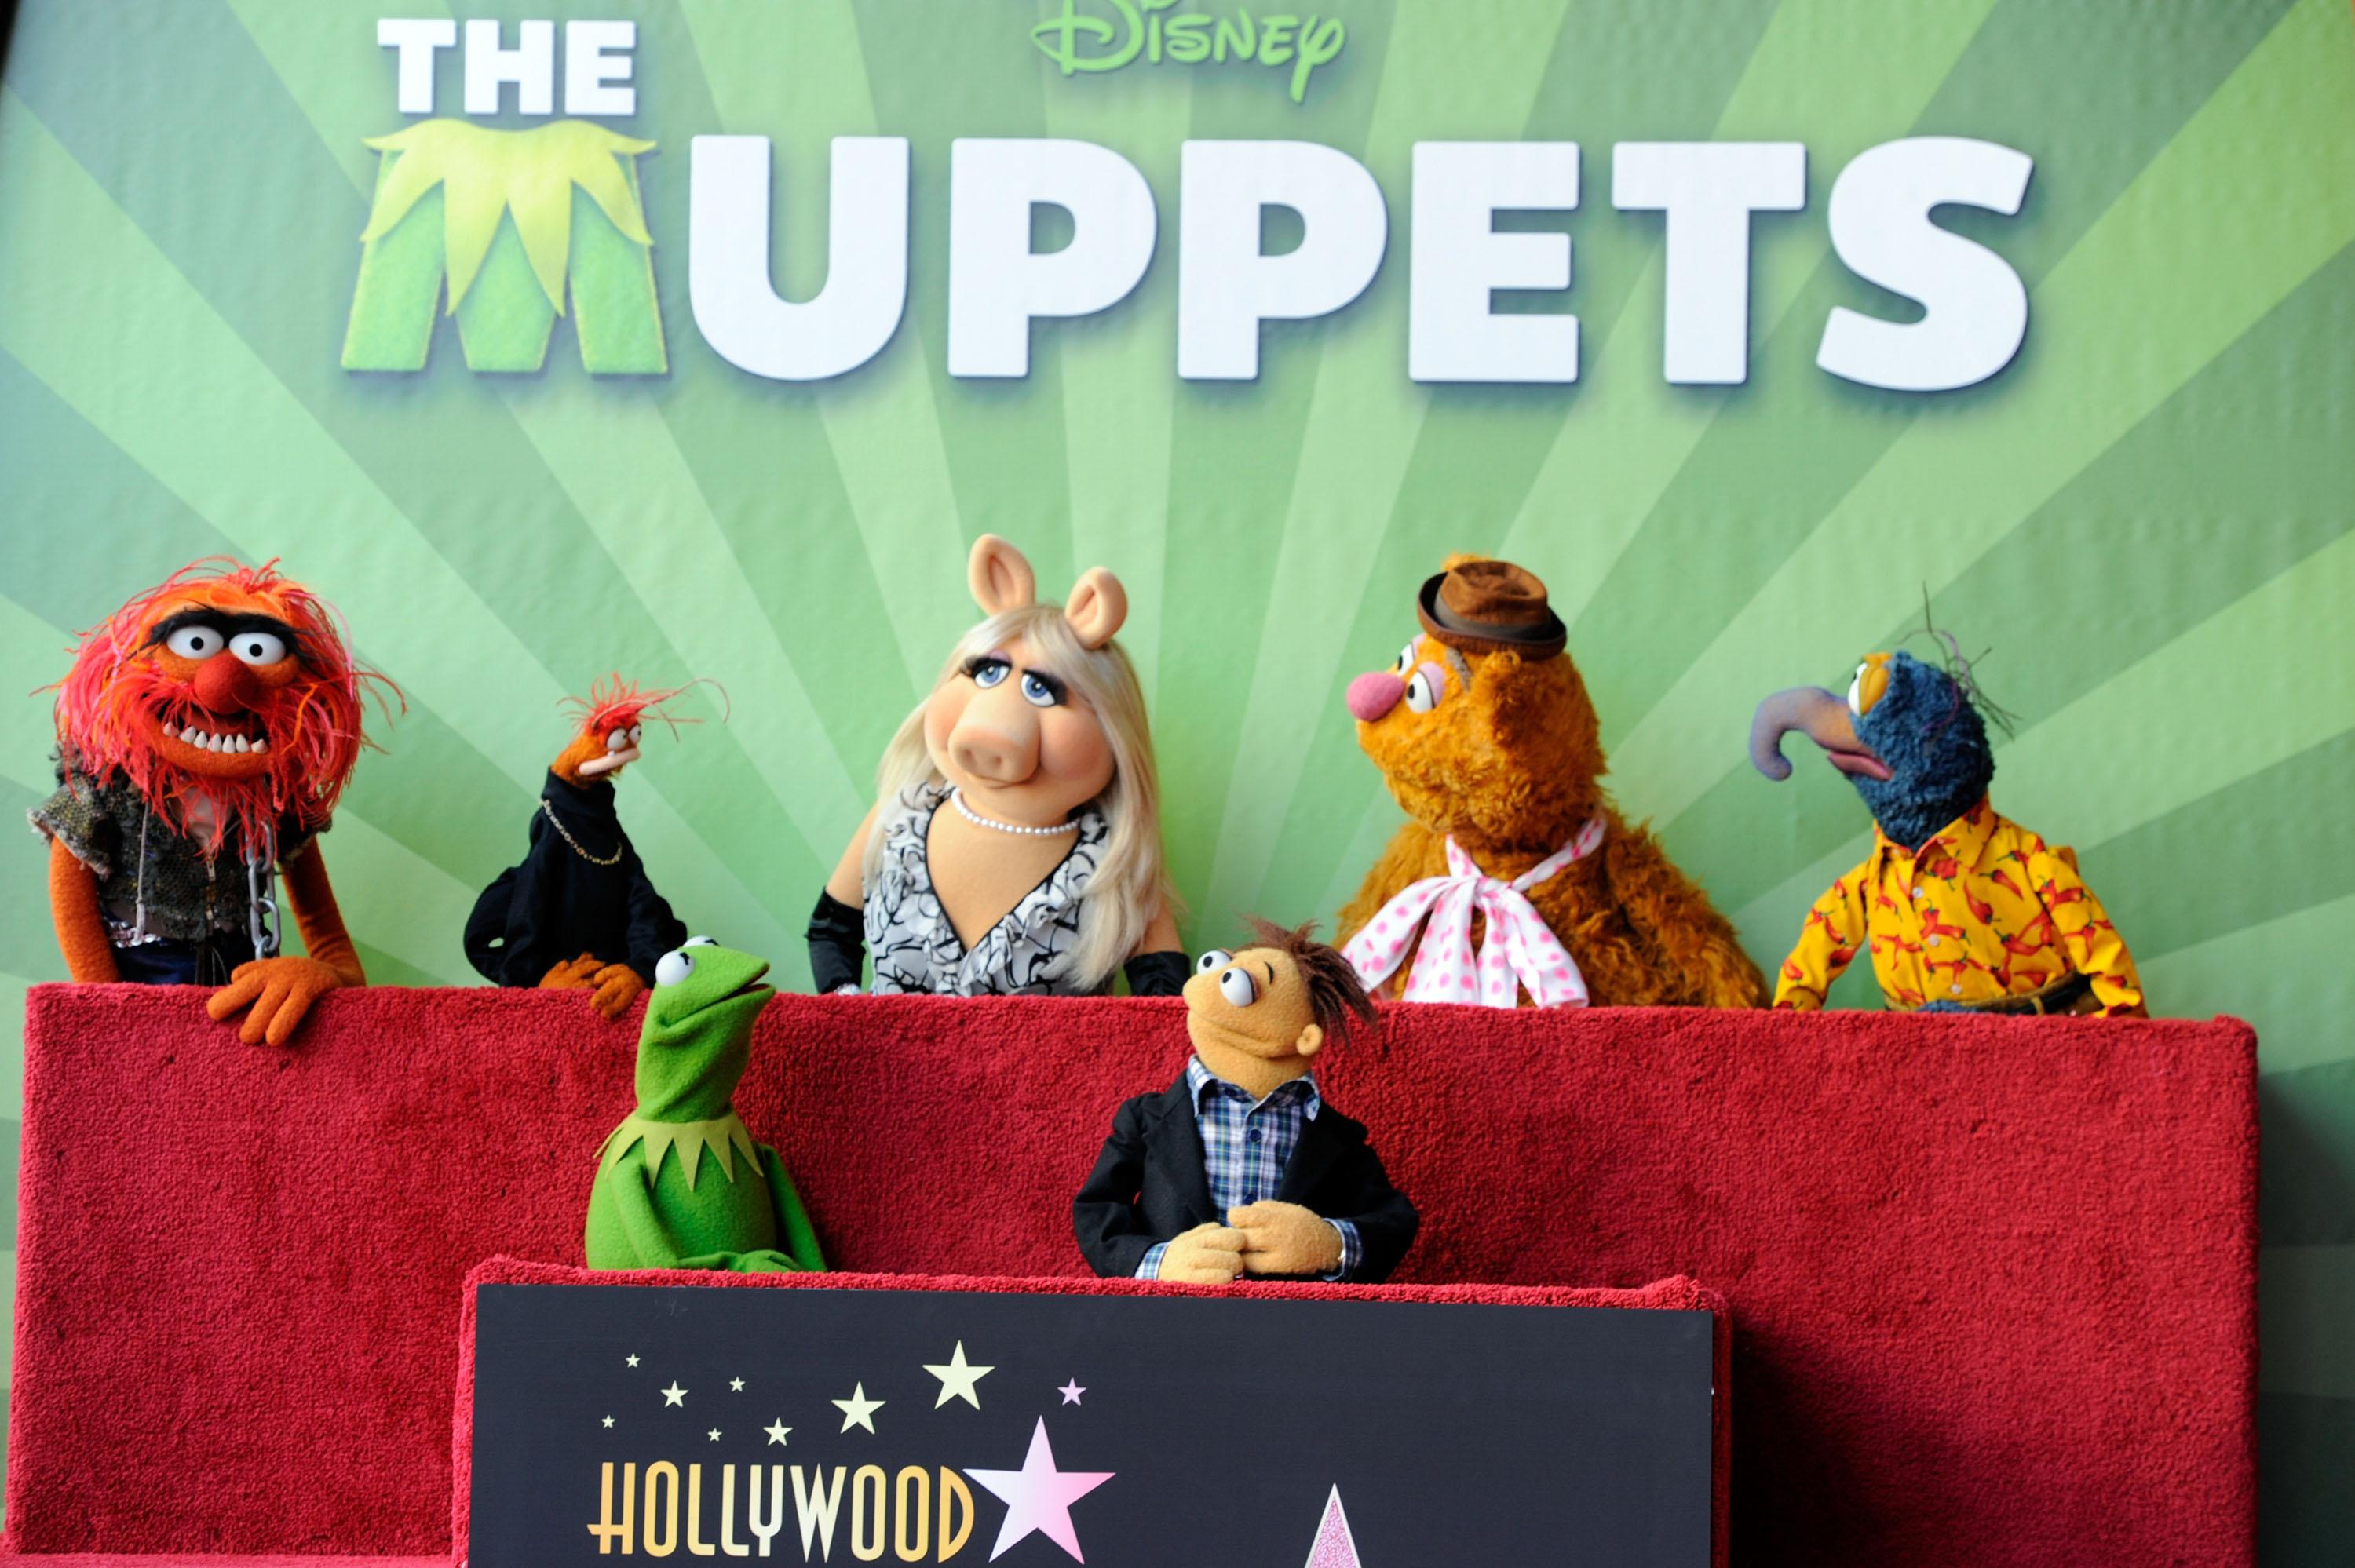 Kermit The Frog appears onstage during the Walt Disney Studios Motion Pictures presentation at CinemaCon 2012.